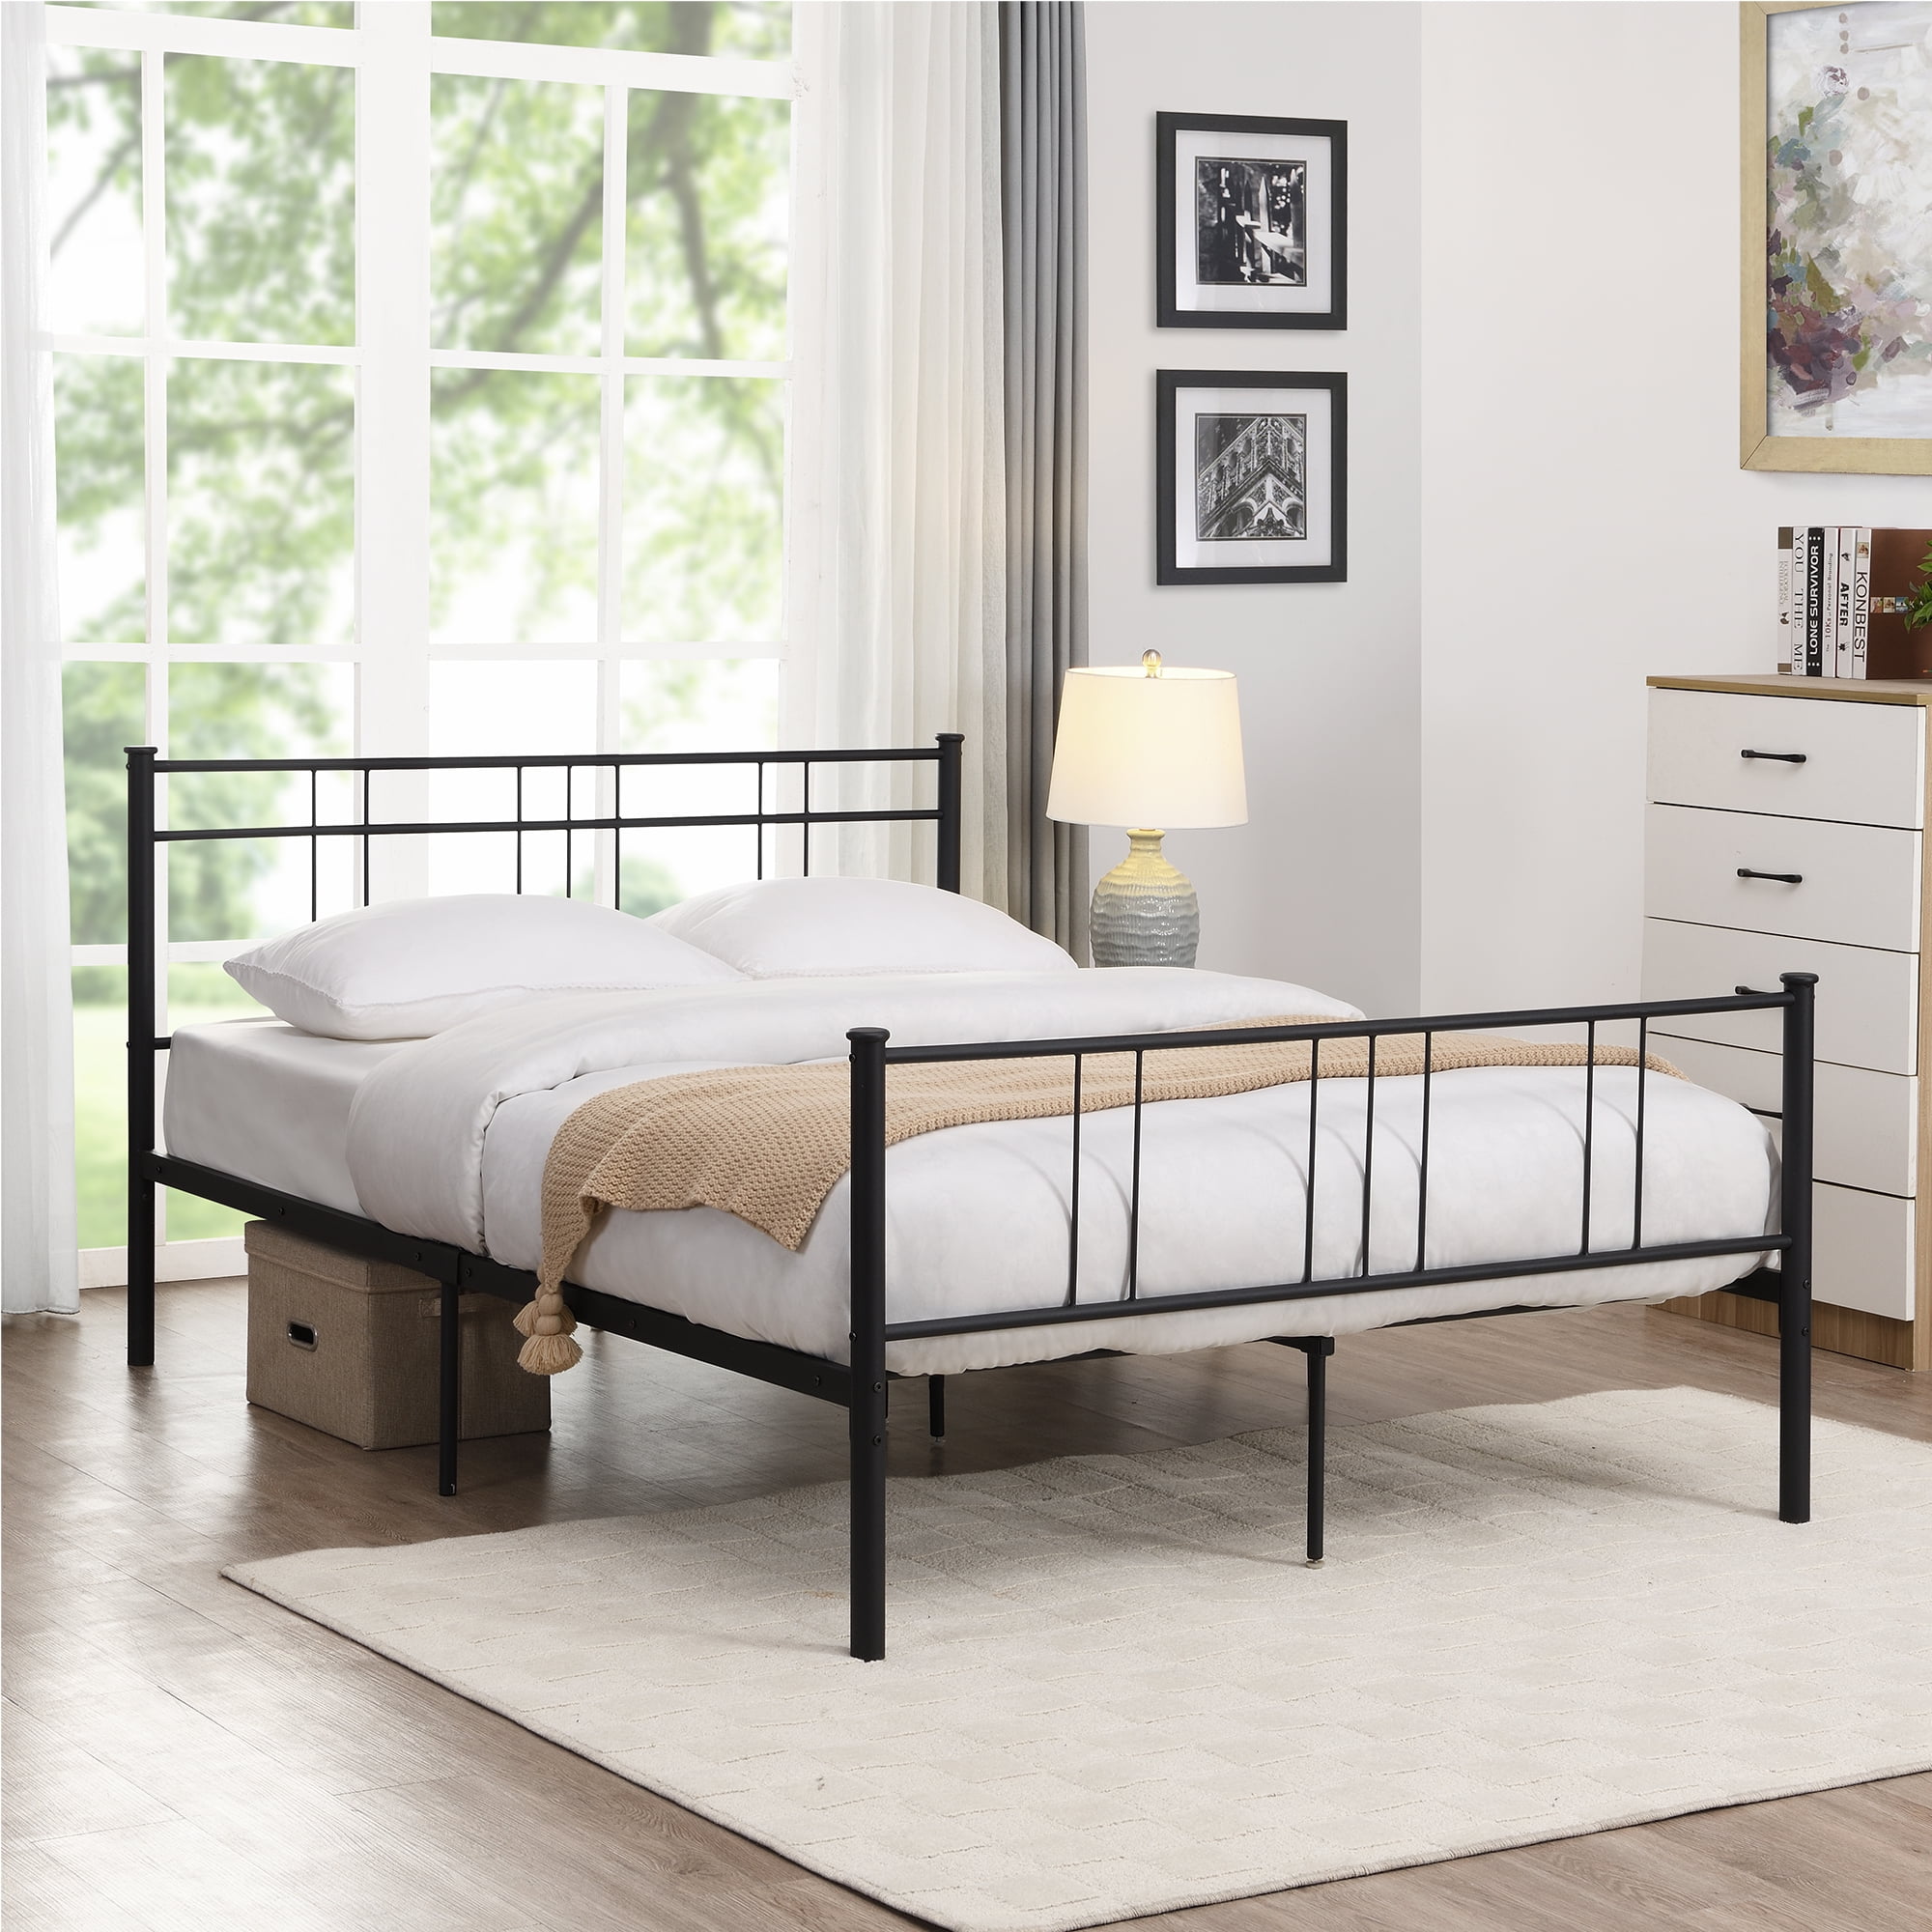 Metal Bed Frame With Headboard, How To Cover Metal Bed Frame